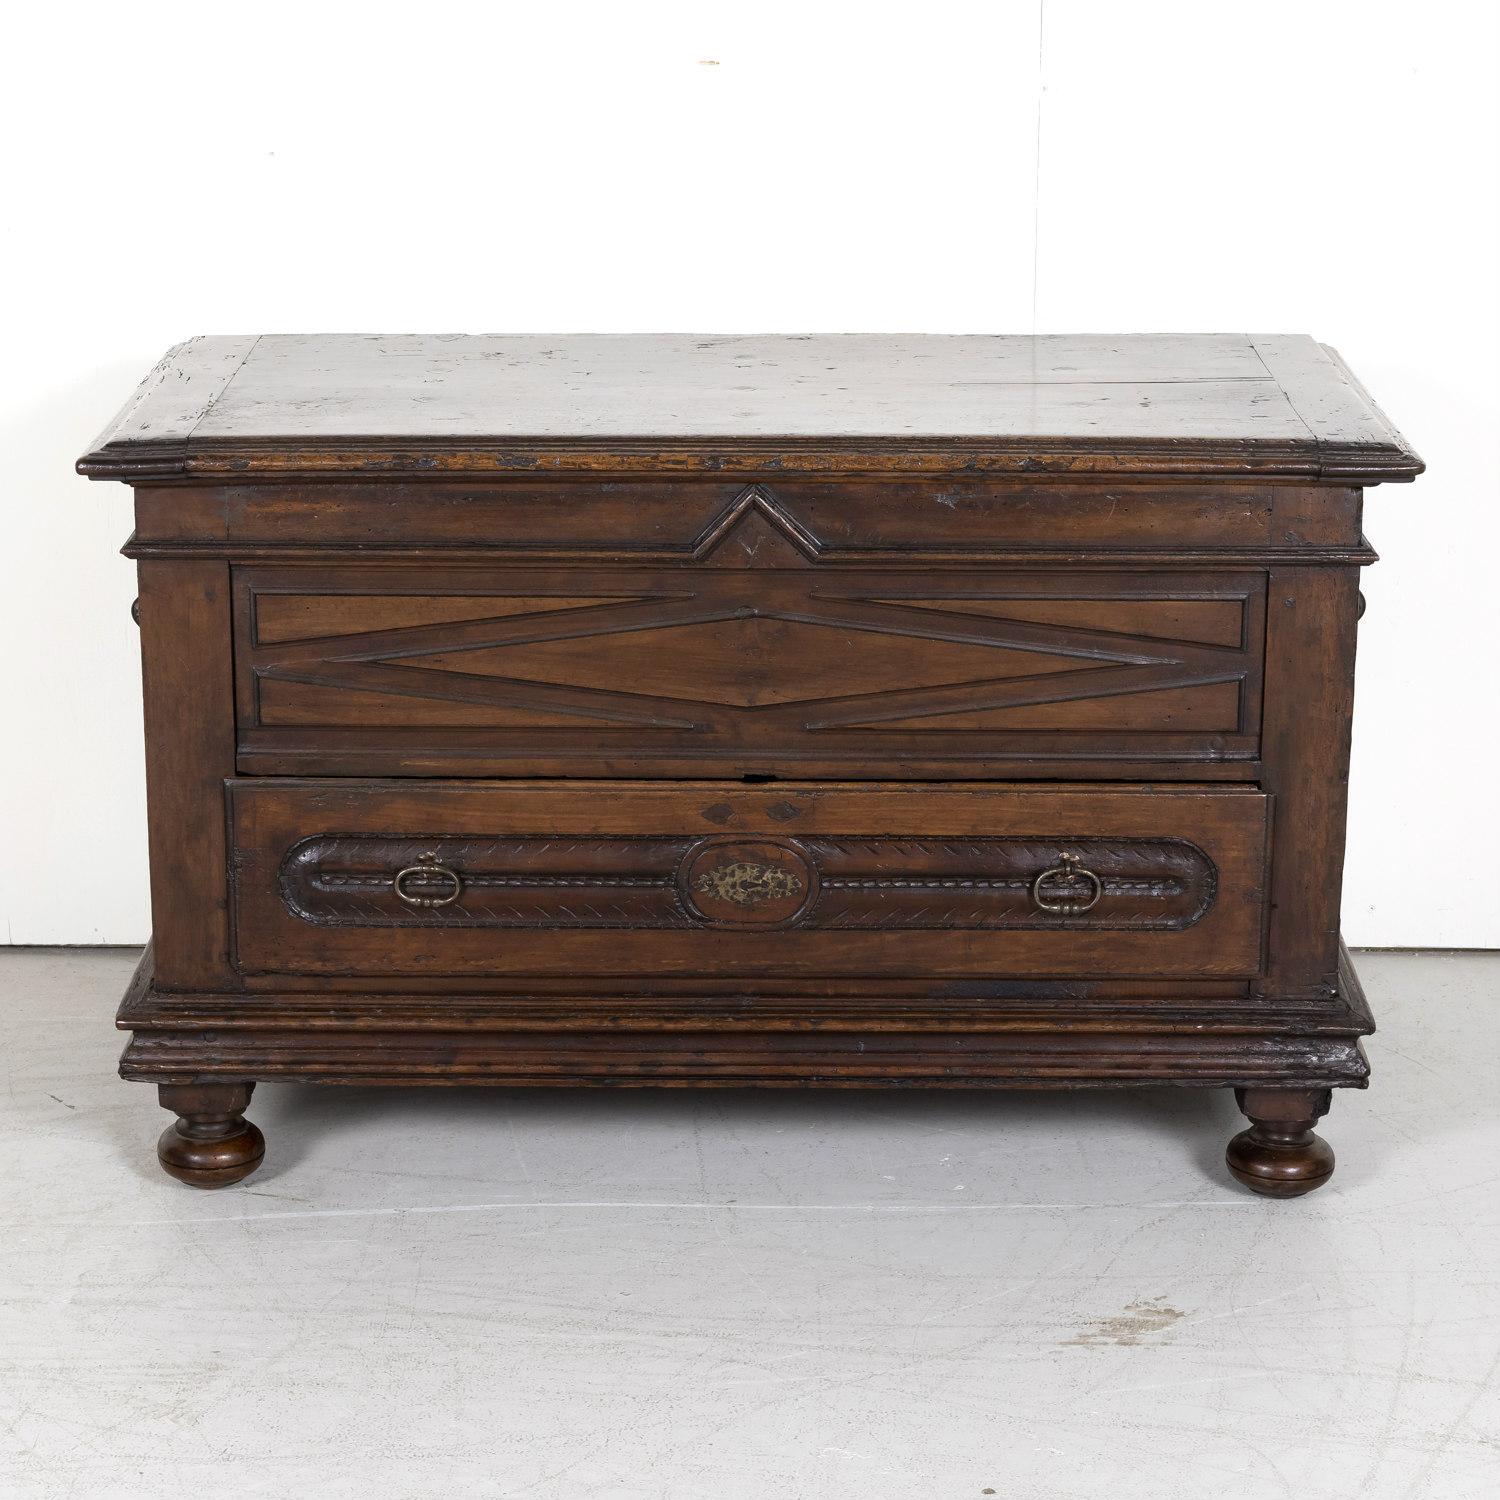 Early 18th Century Louis XIII Style Solid Walnut Coffer or Trunk with Drawer In Good Condition For Sale In Birmingham, AL